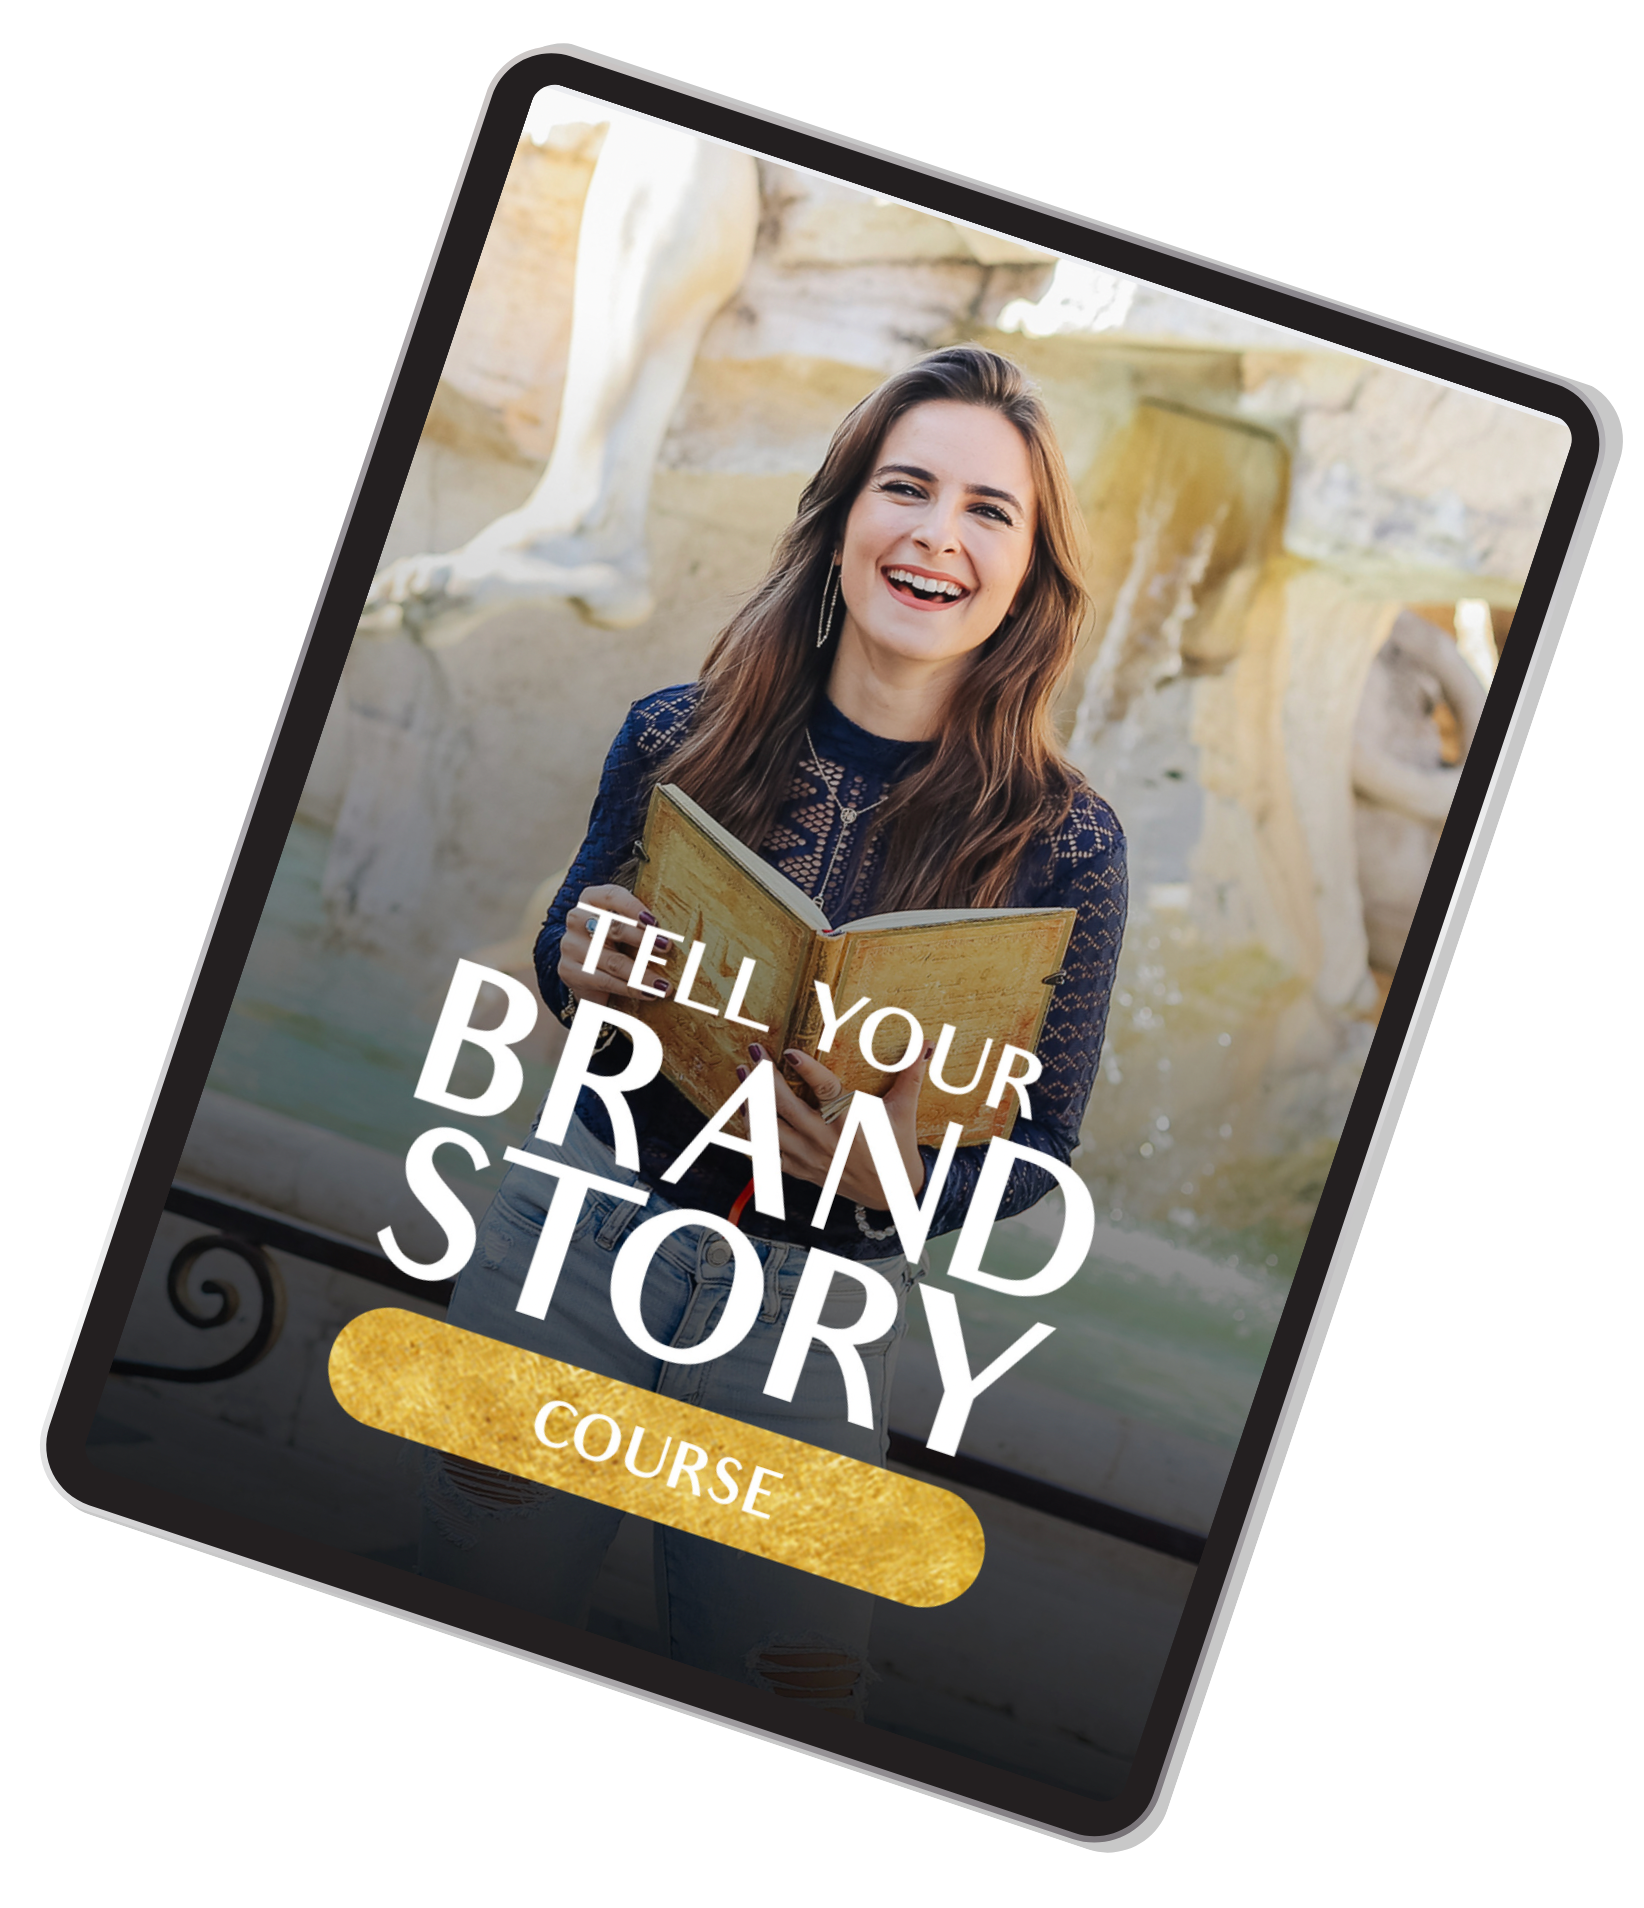 Tell Your Brand Story